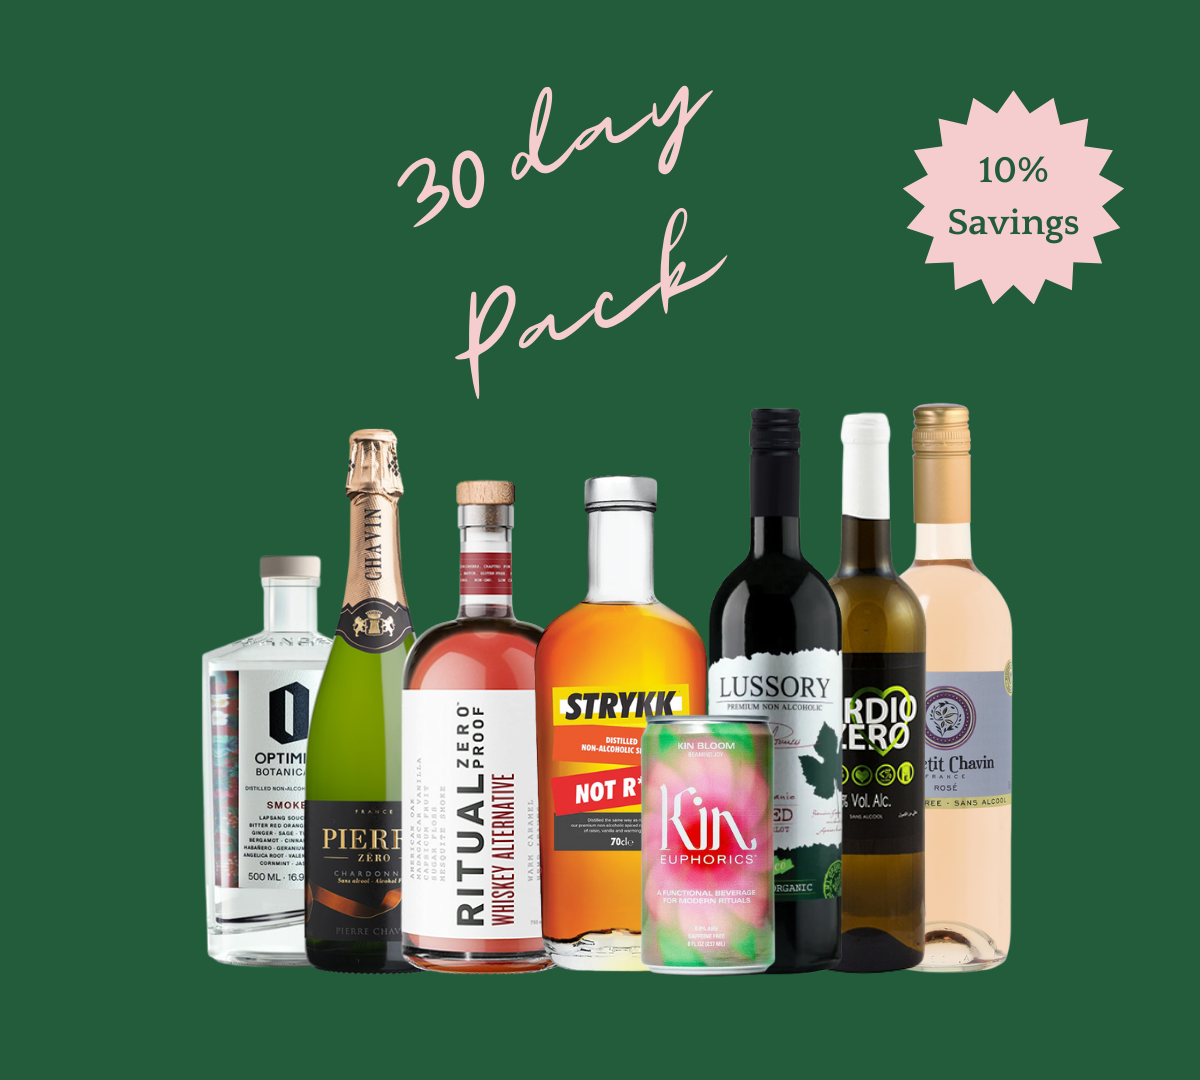 The 30 Day Alcohol-Free Pack